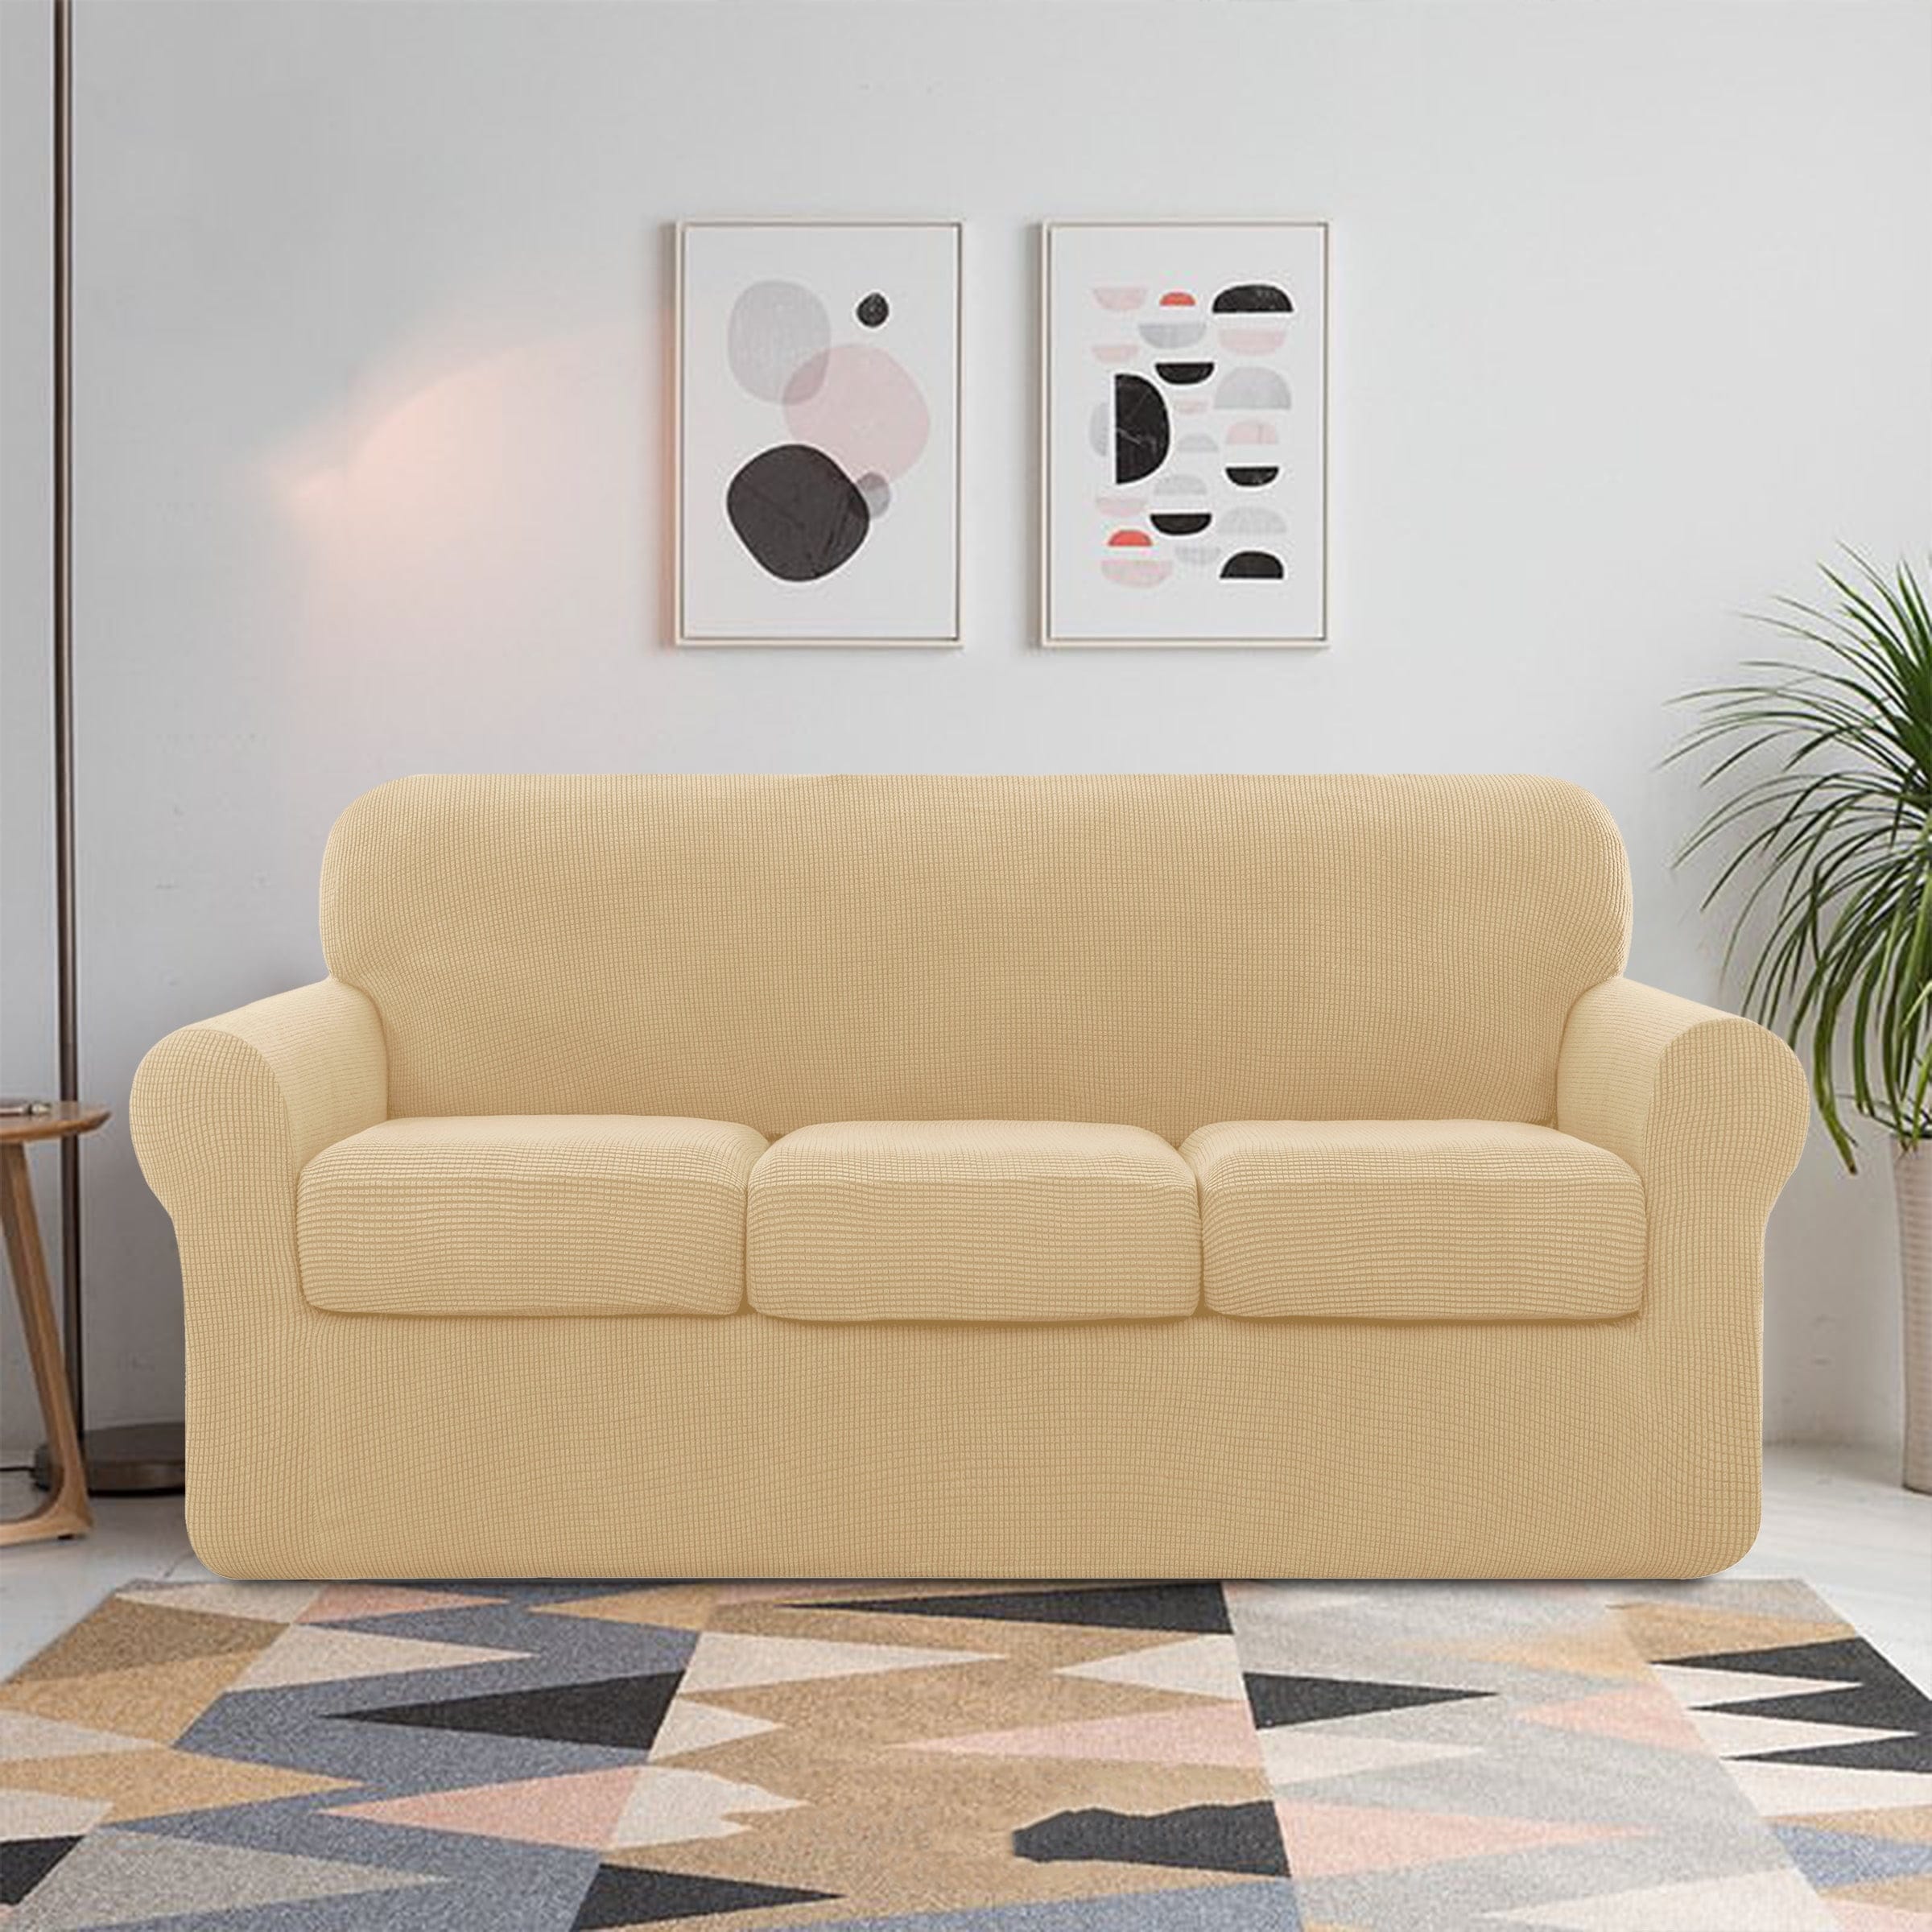 https://ak1.ostkcdn.com/images/products/is/images/direct/0cb234936b6ab5a567e2a4ffdb37af23448944f6/Subrtex-Slipcover-Stretch-Sofa-Cover-with-Separate-Cushion-Covers.jpg